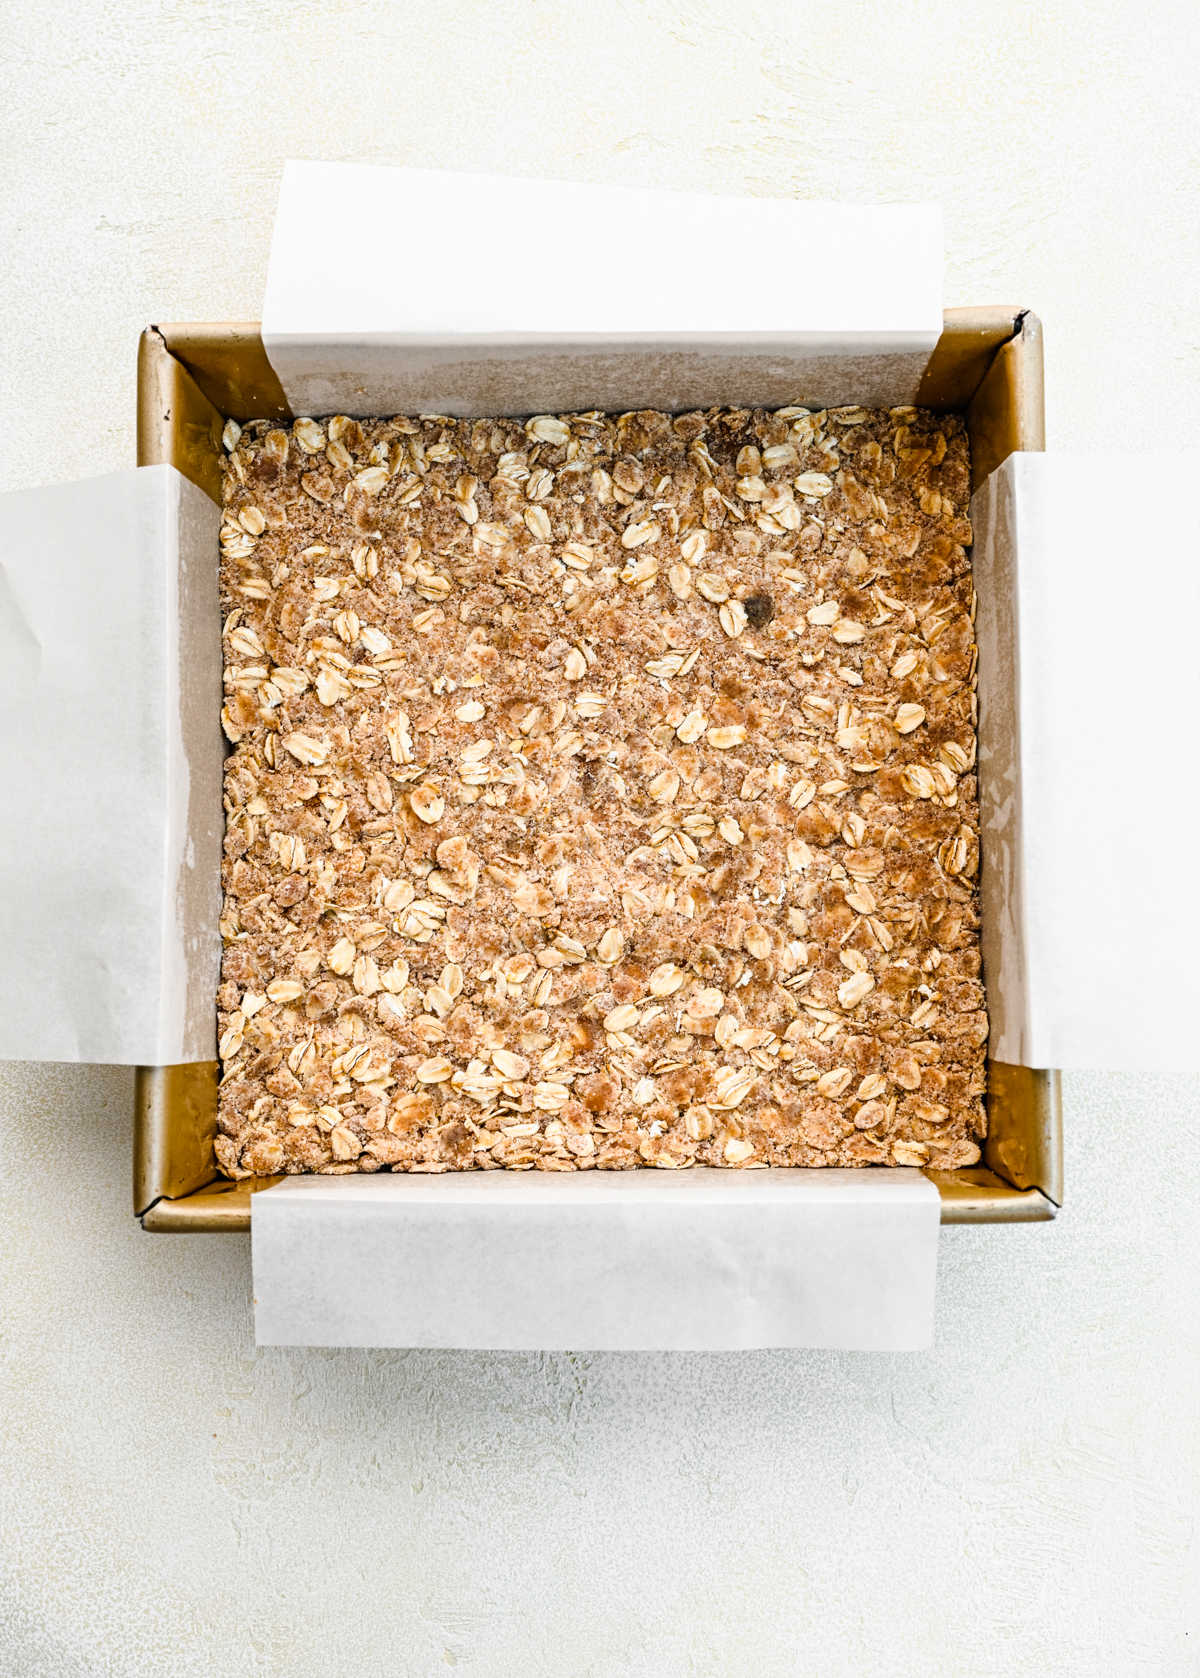 Oatmeal crumble pressed into a baking pan. 